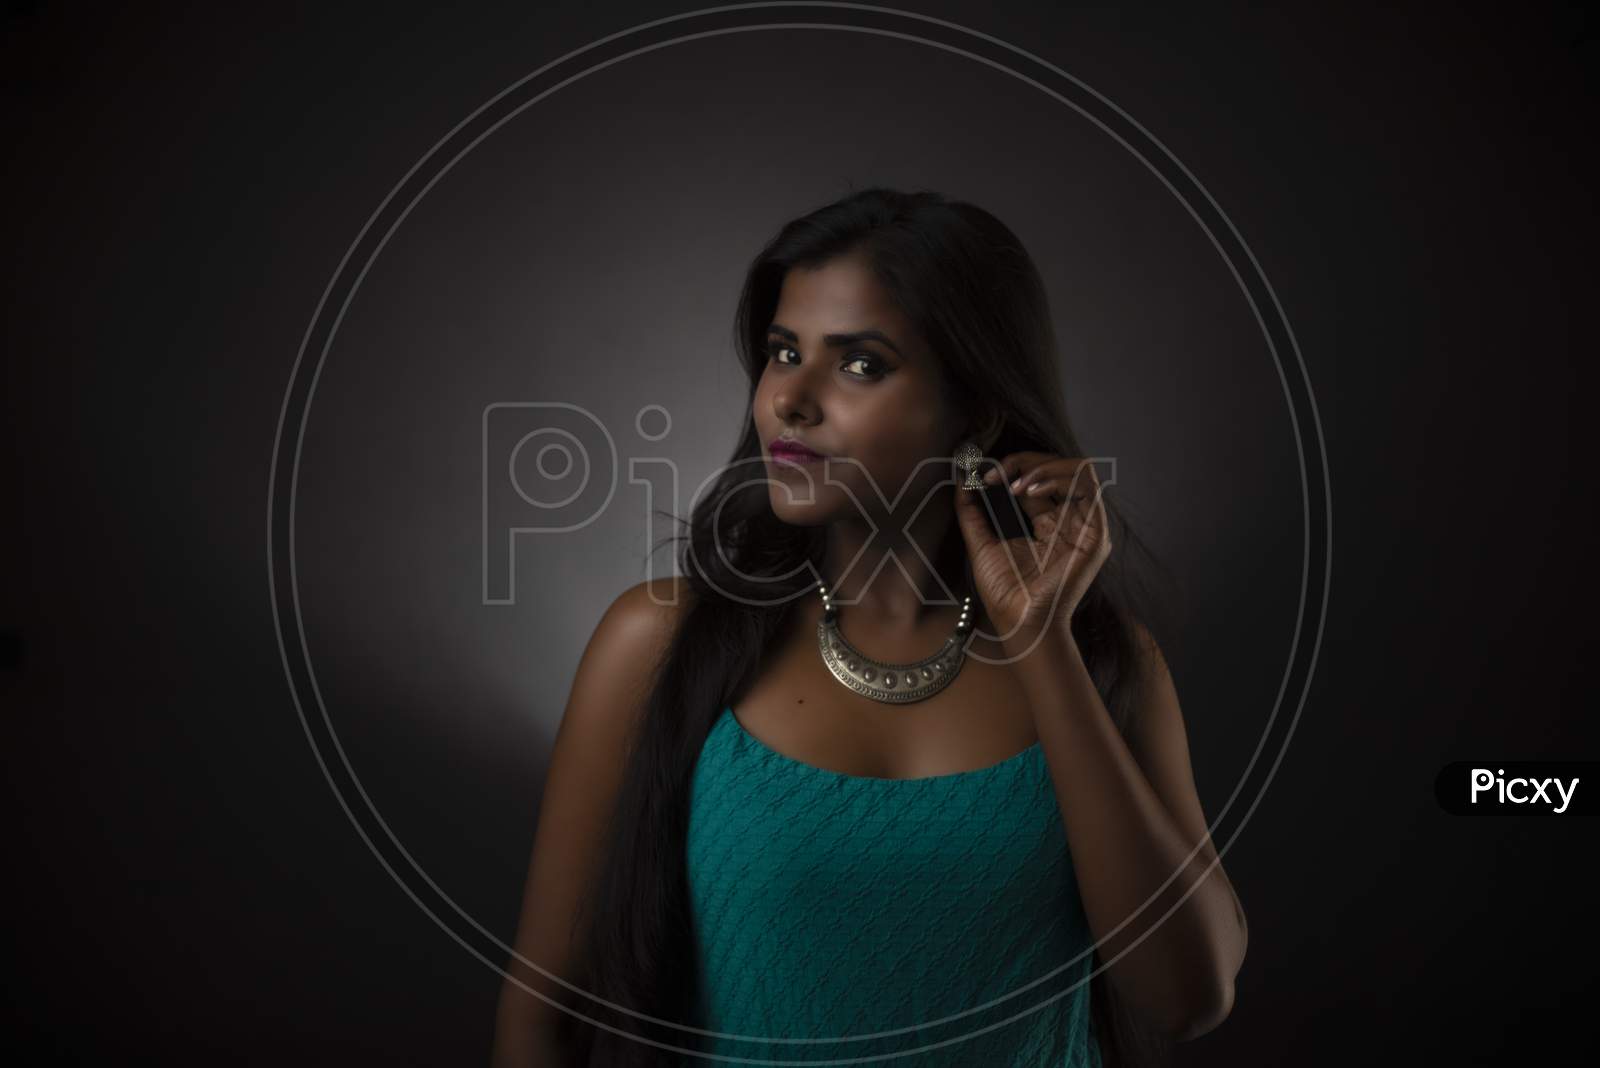 Image Of Fashion Portrait Of Young Dark Skinned Indianafrican Brunette